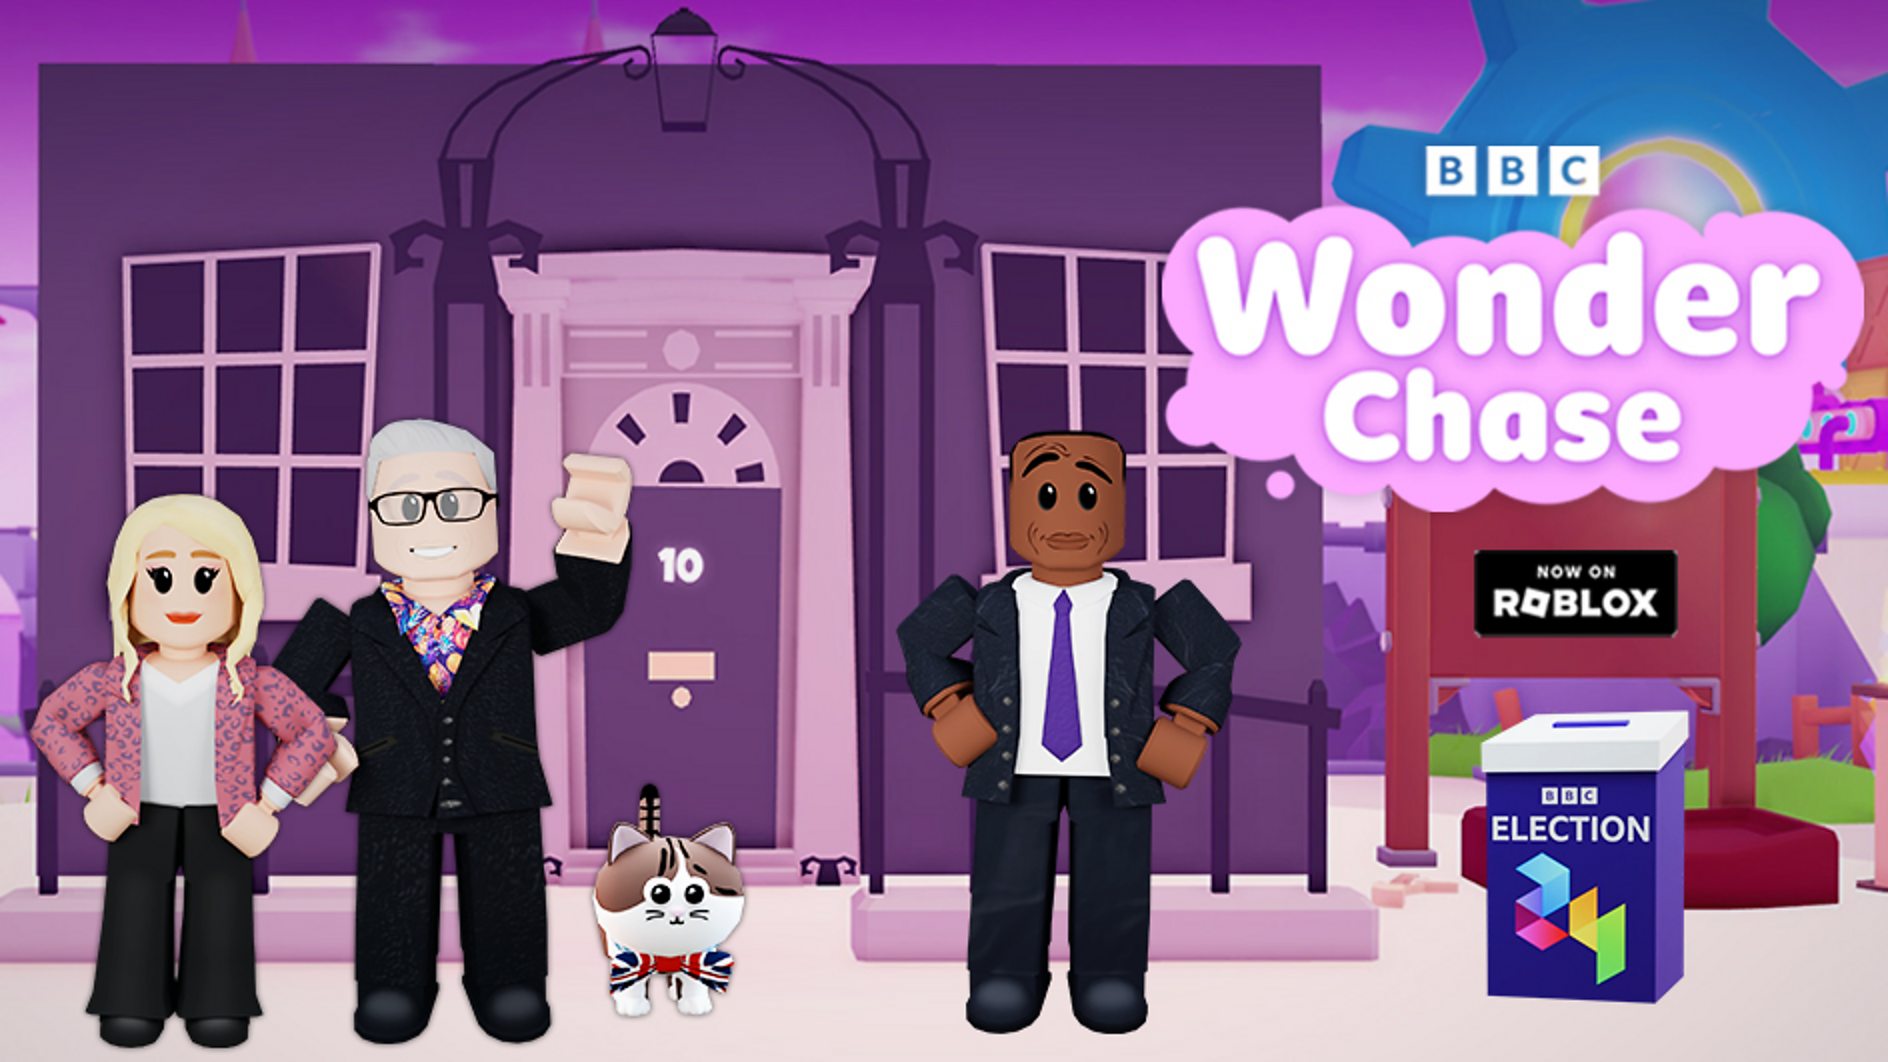 BBC brings the General Election to Roblox with Larry the Downing Street cat